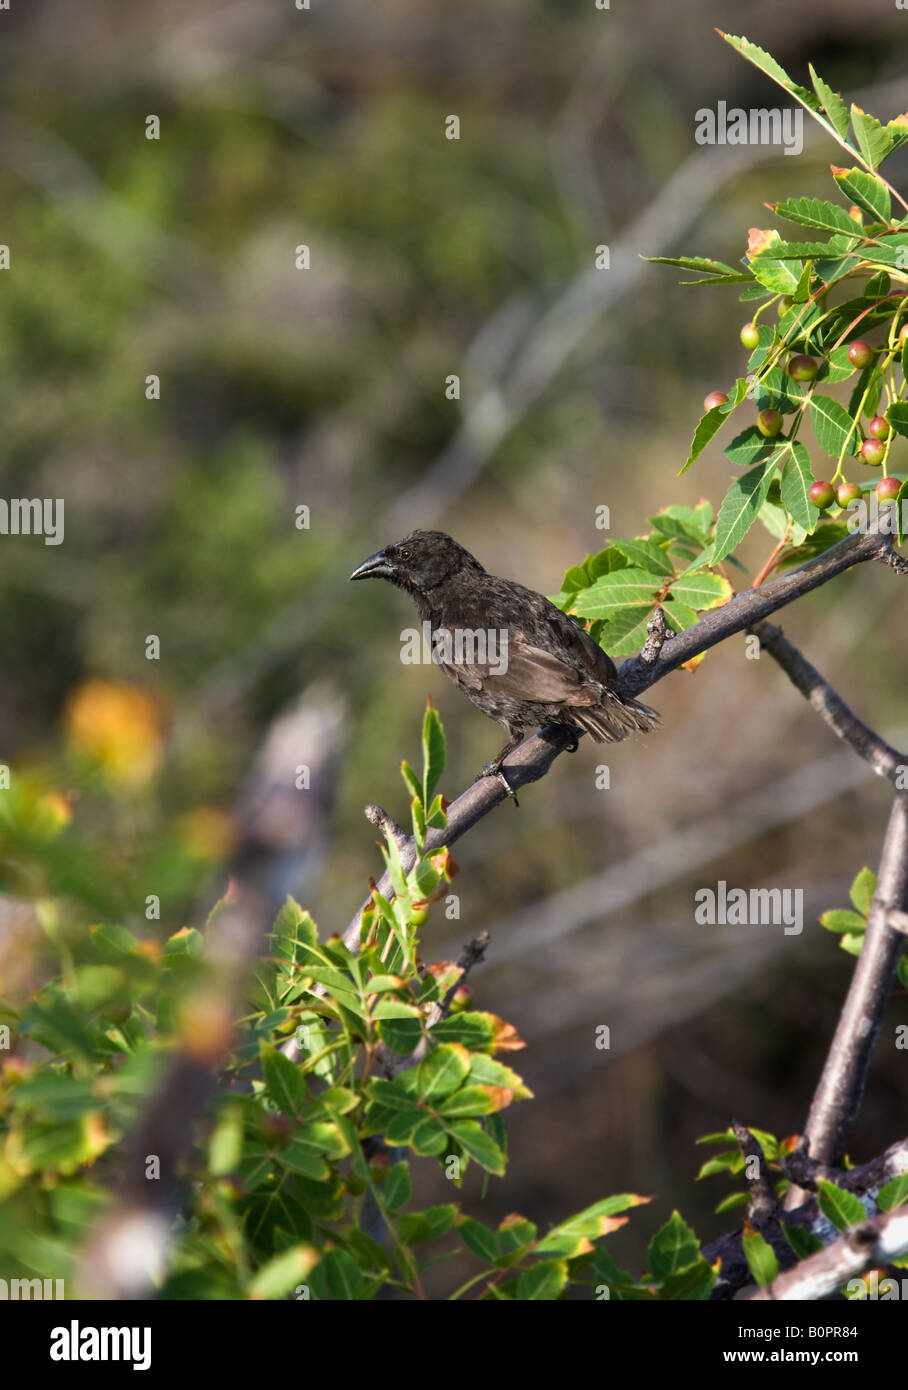 Medium Ground Finch - Geospiza fortis - on Isabela in the Galapagos Islands off the coast of Ecuador Stock Photo